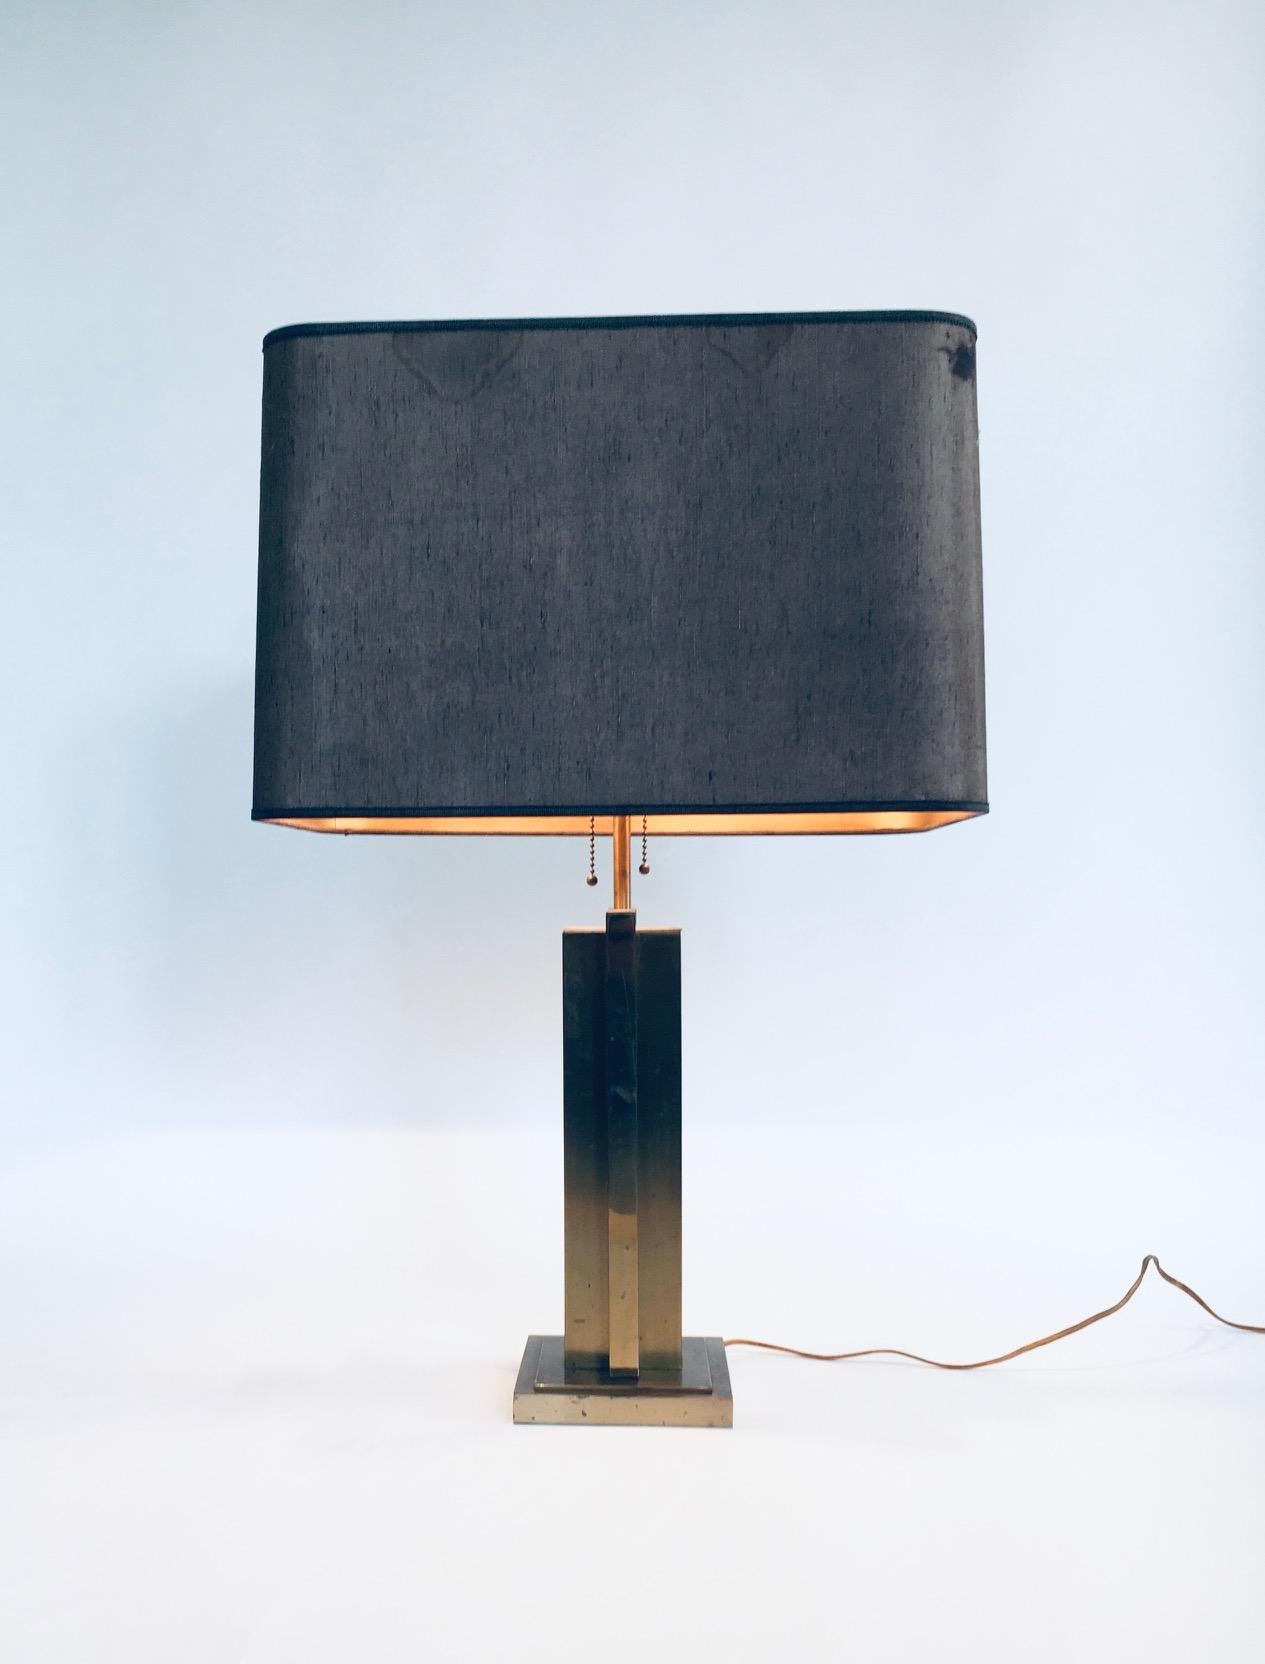 1970's Postmodern Design Brass Architectural Table Lamp In Good Condition For Sale In Oud-Turnhout, VAN